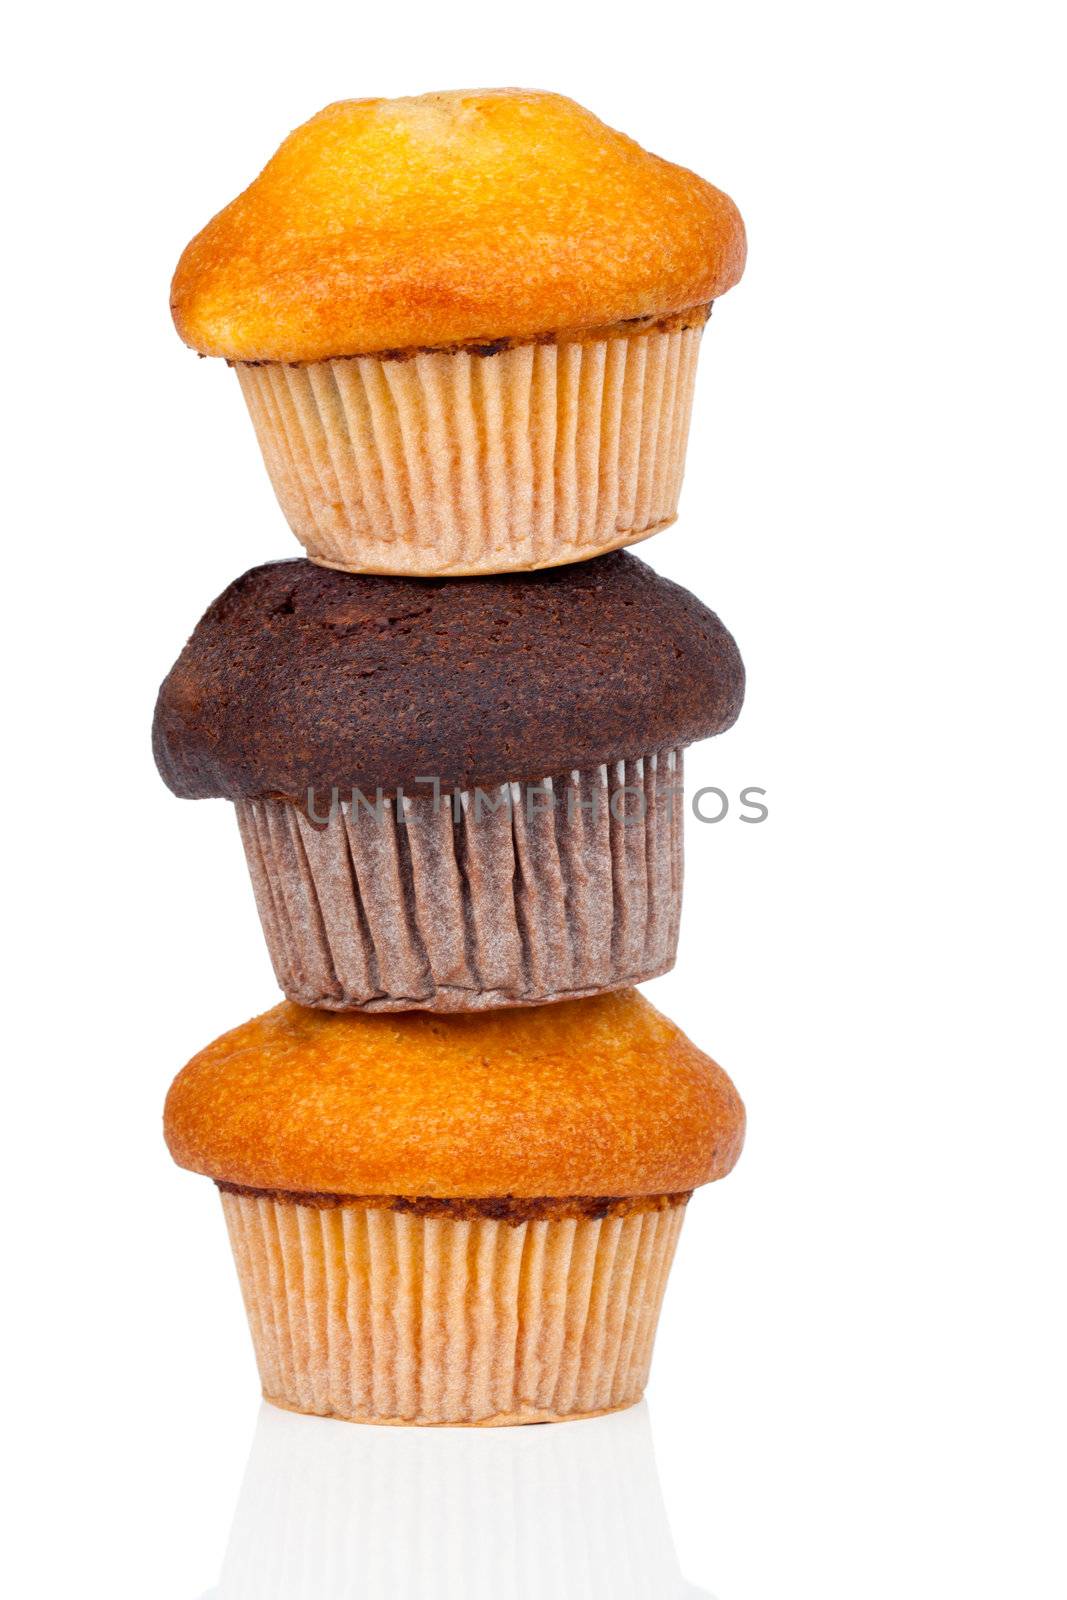 muffin isolated on white background. by motorolka